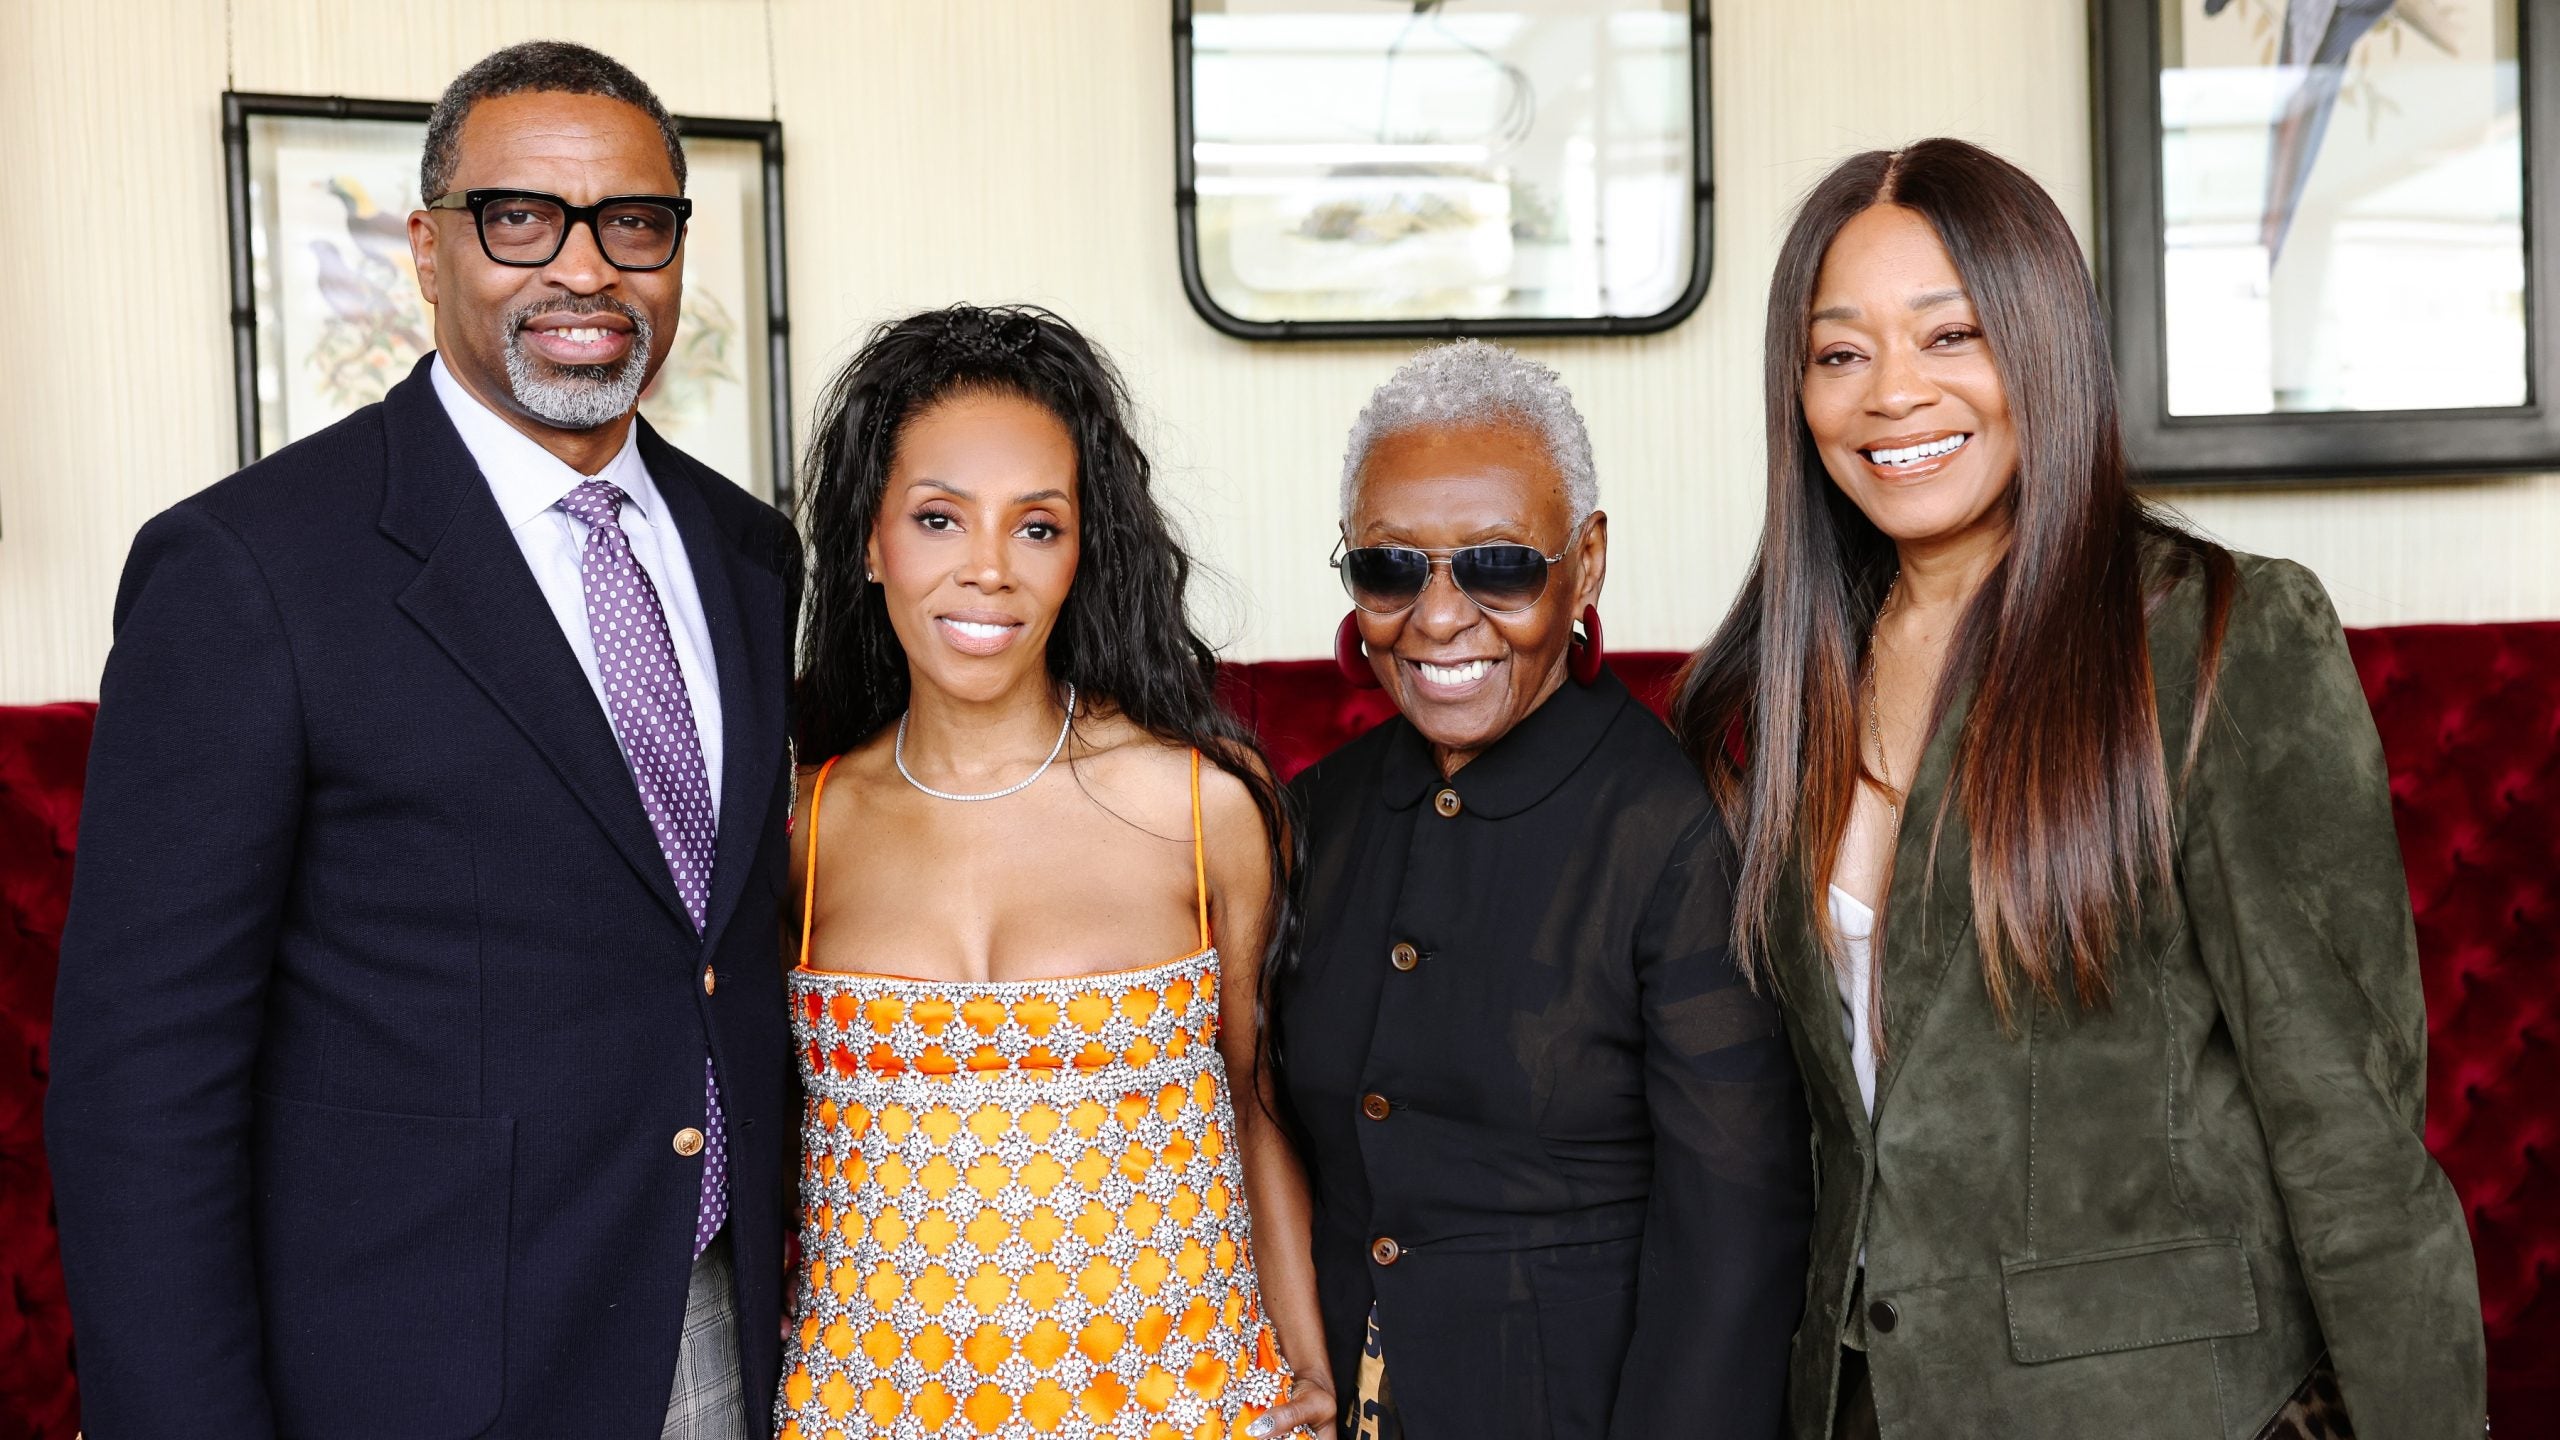 Essence Fashion Digest: Gucci Hosts An NAACP Image Awards Celebration, Andrea Iyamah's Latest Collection, And More